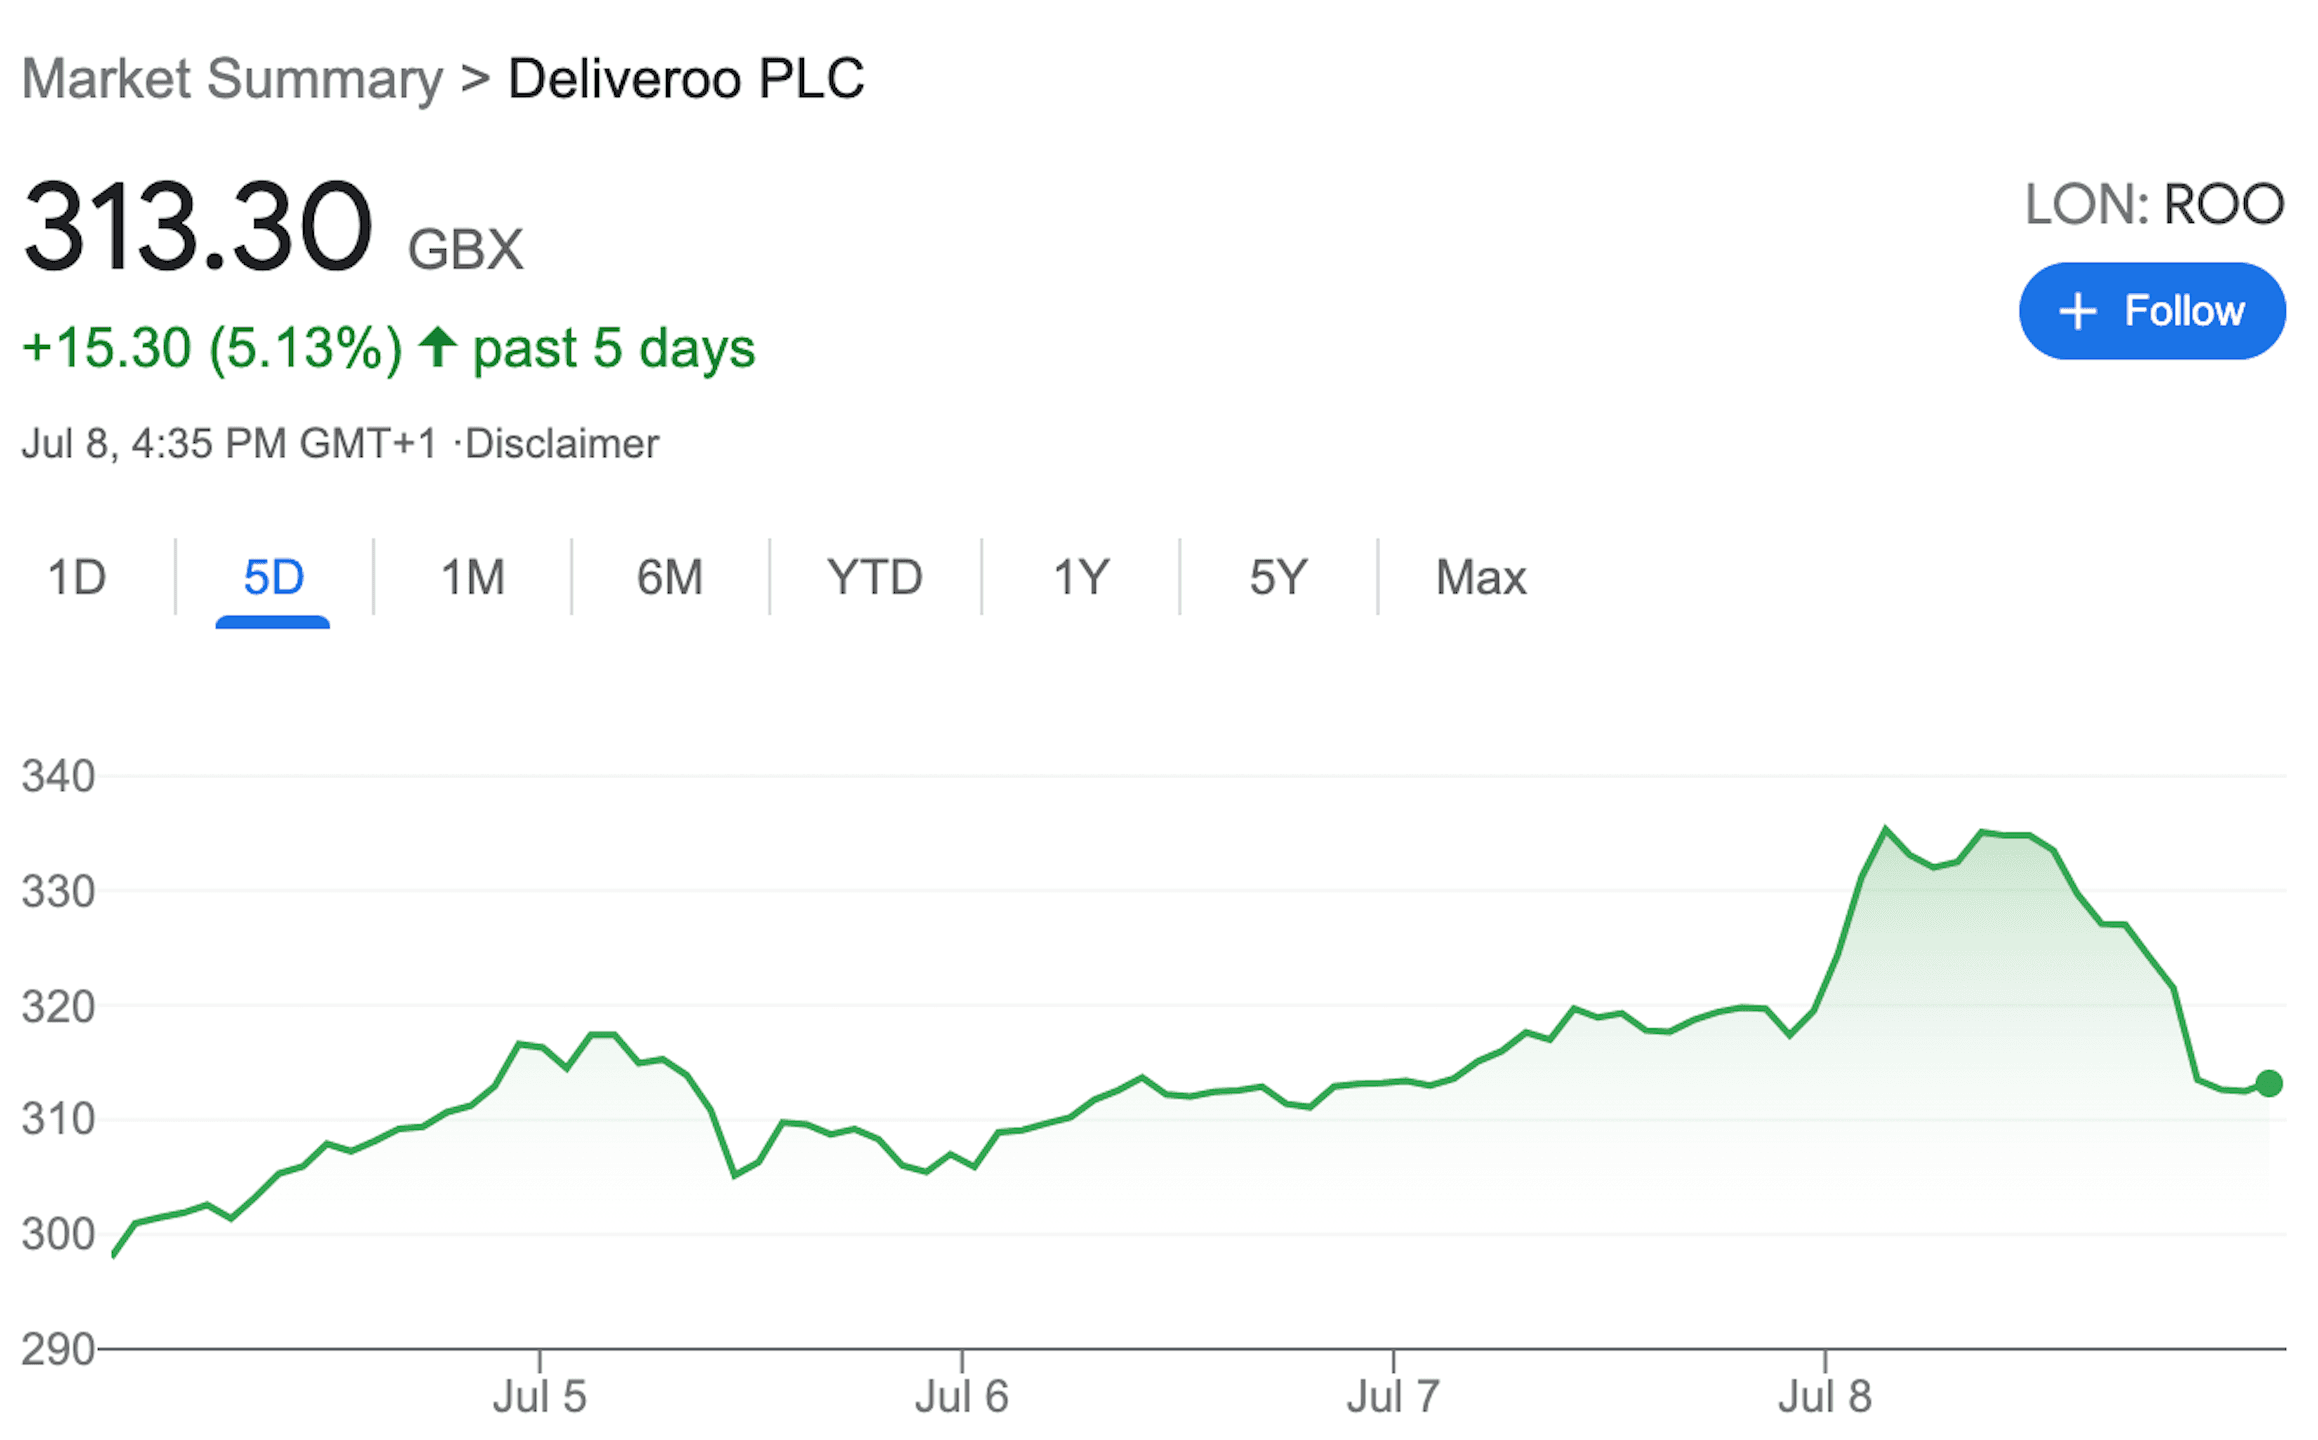 Deliveroo stock